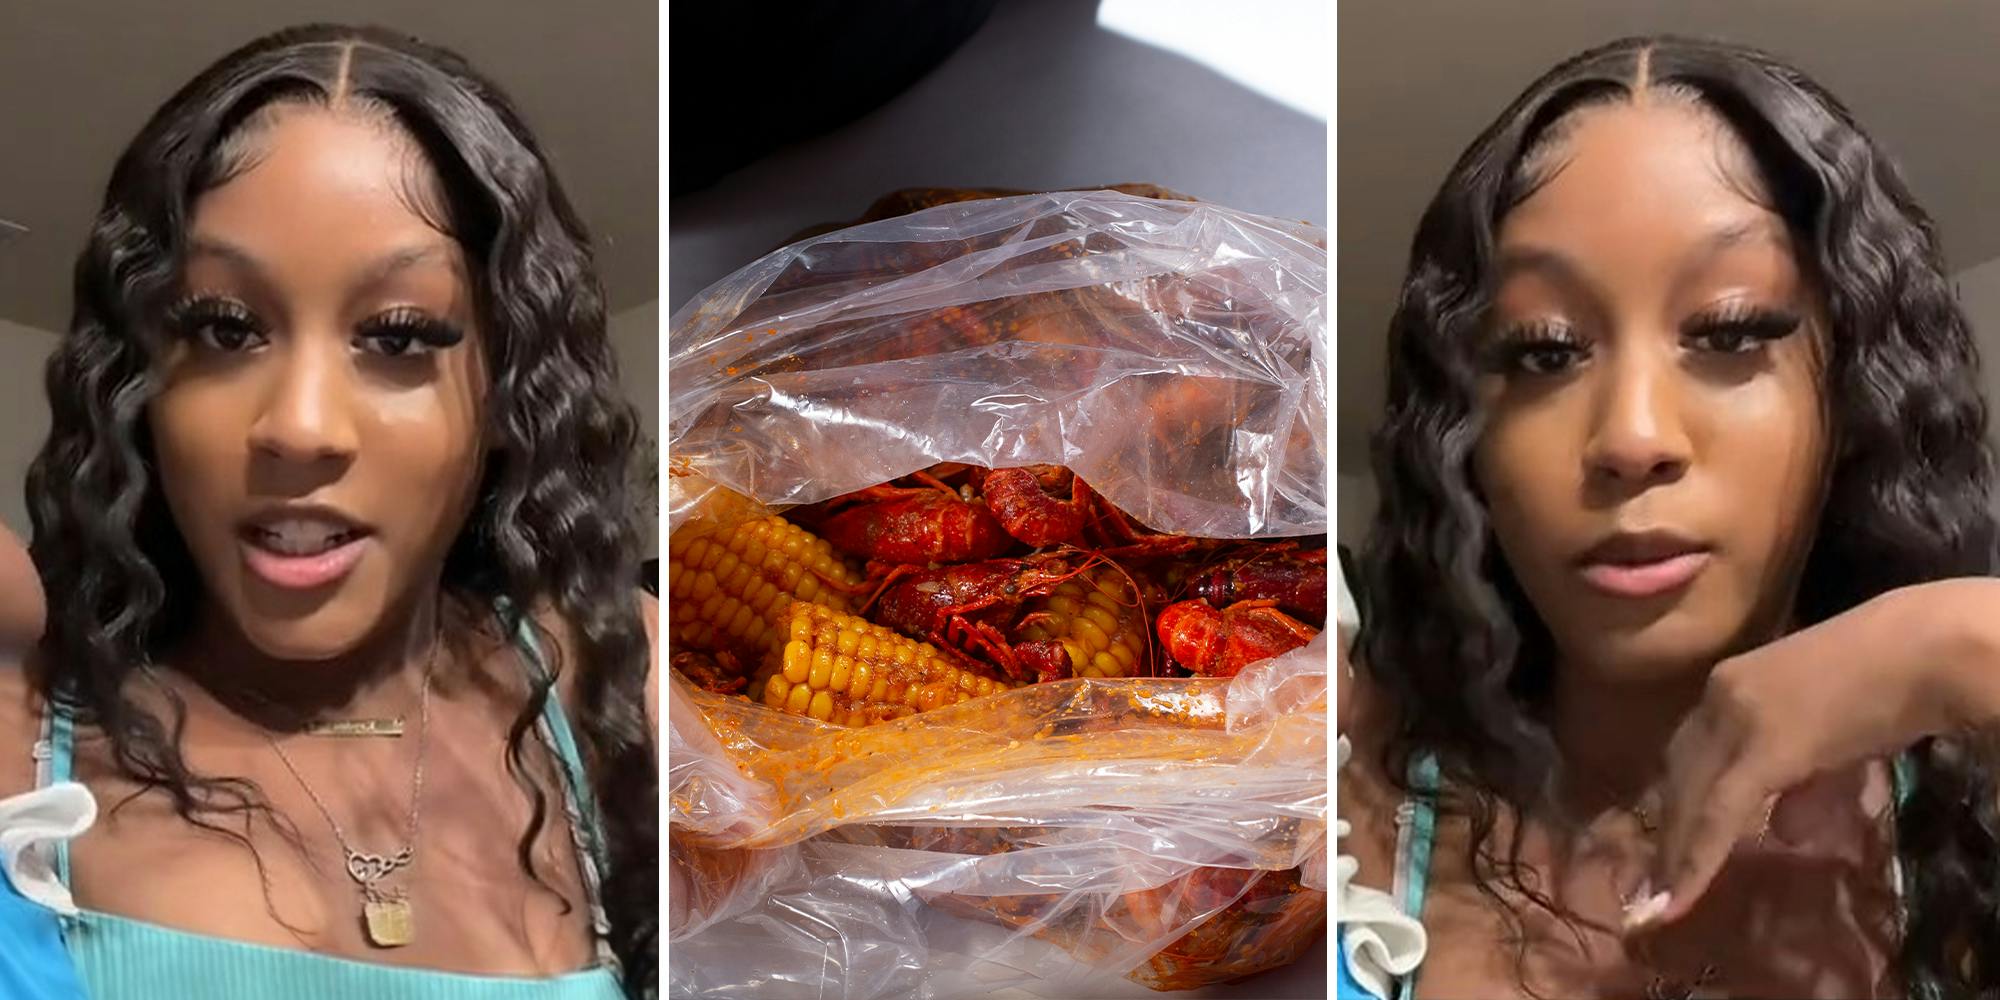 ‘Seafood boil with a side of lead’: Woman orders $30 seafood boil from Facebook Marketplace. She gets more than she bargained for